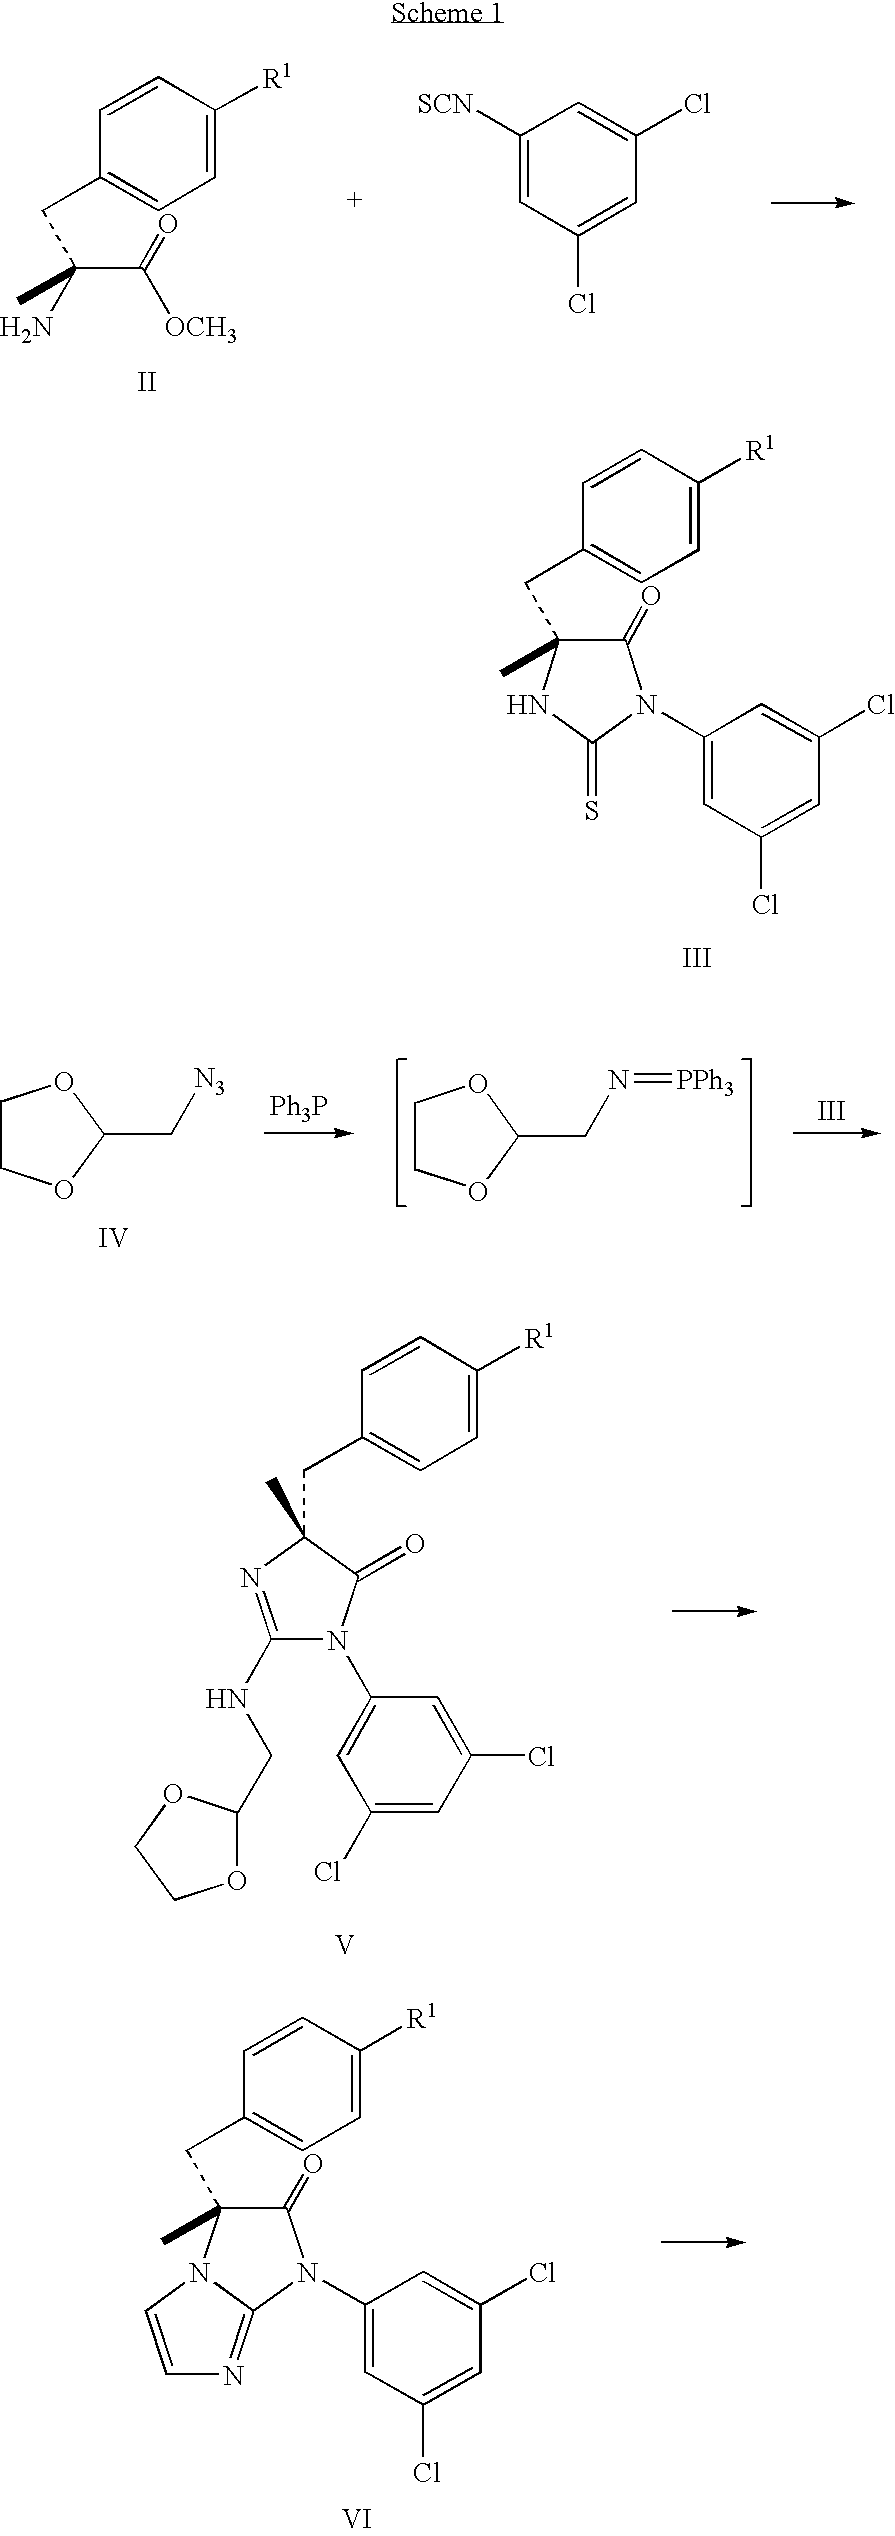 Synthesis of 6,7-Dihydro-5H-imidazo[1,2-a]imidazole-3-sulfonic acid amides